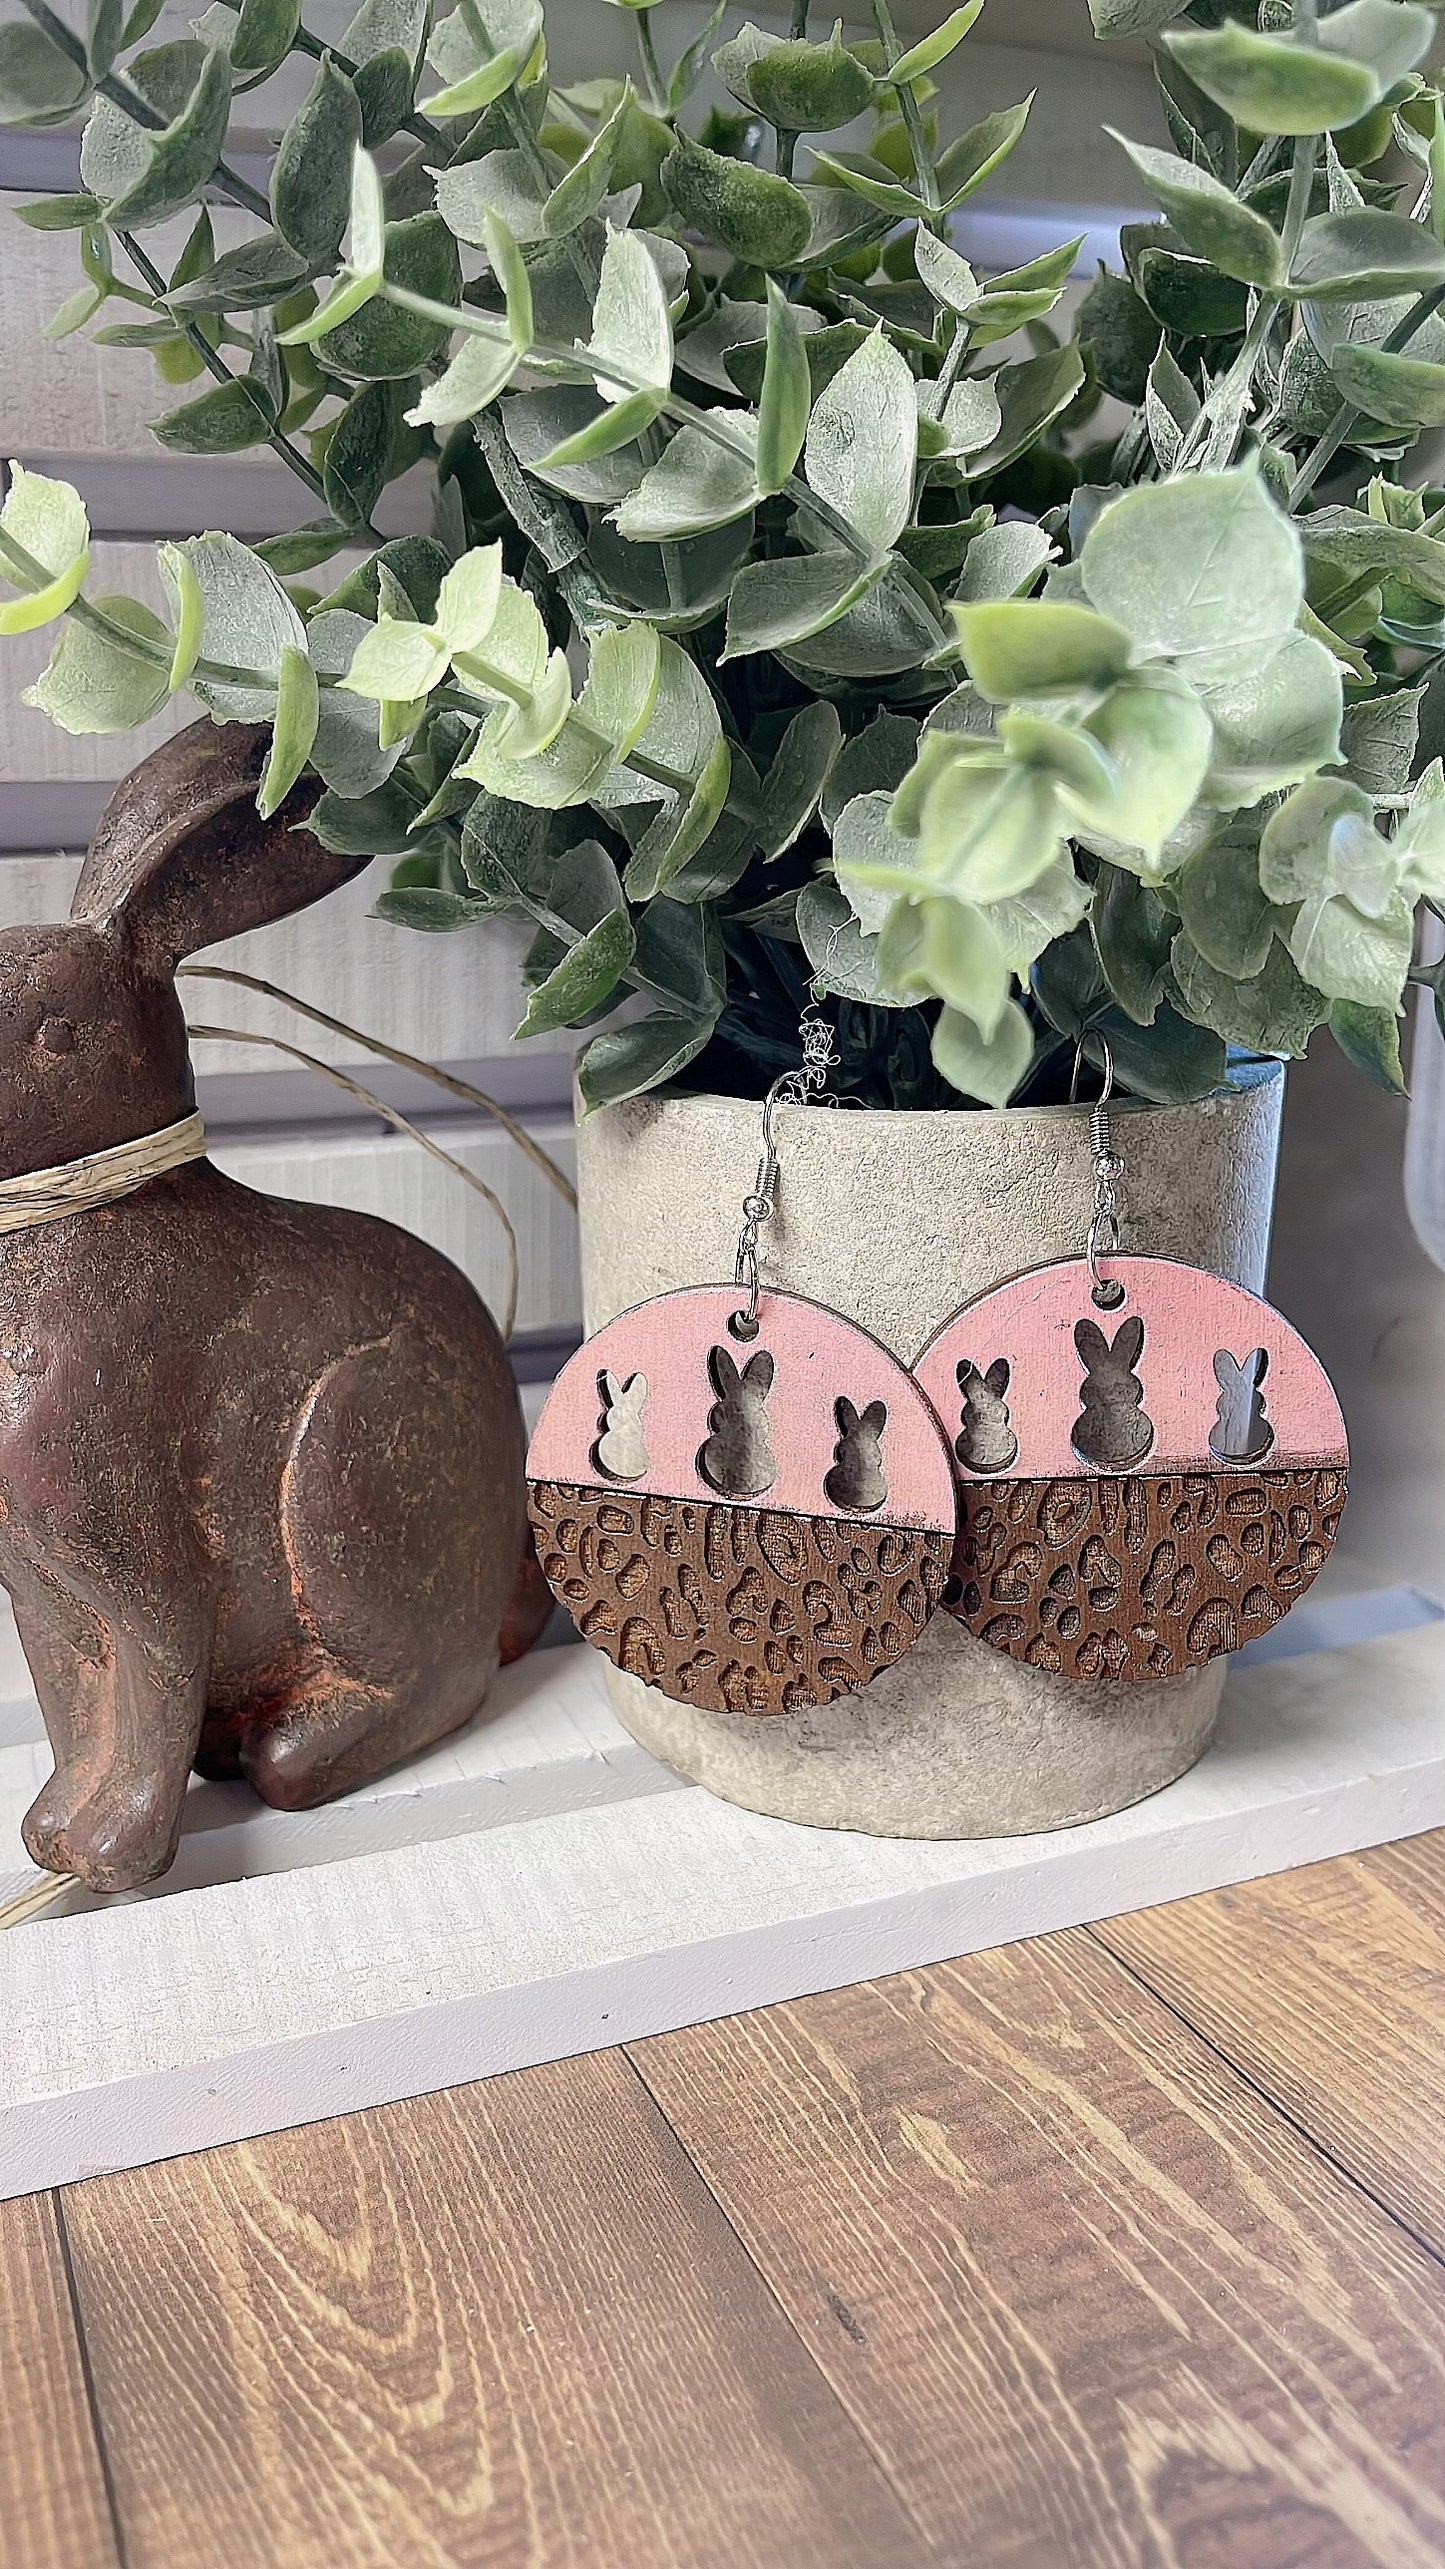 EASTER BUNNY WITH LEOPARD EARRINGS